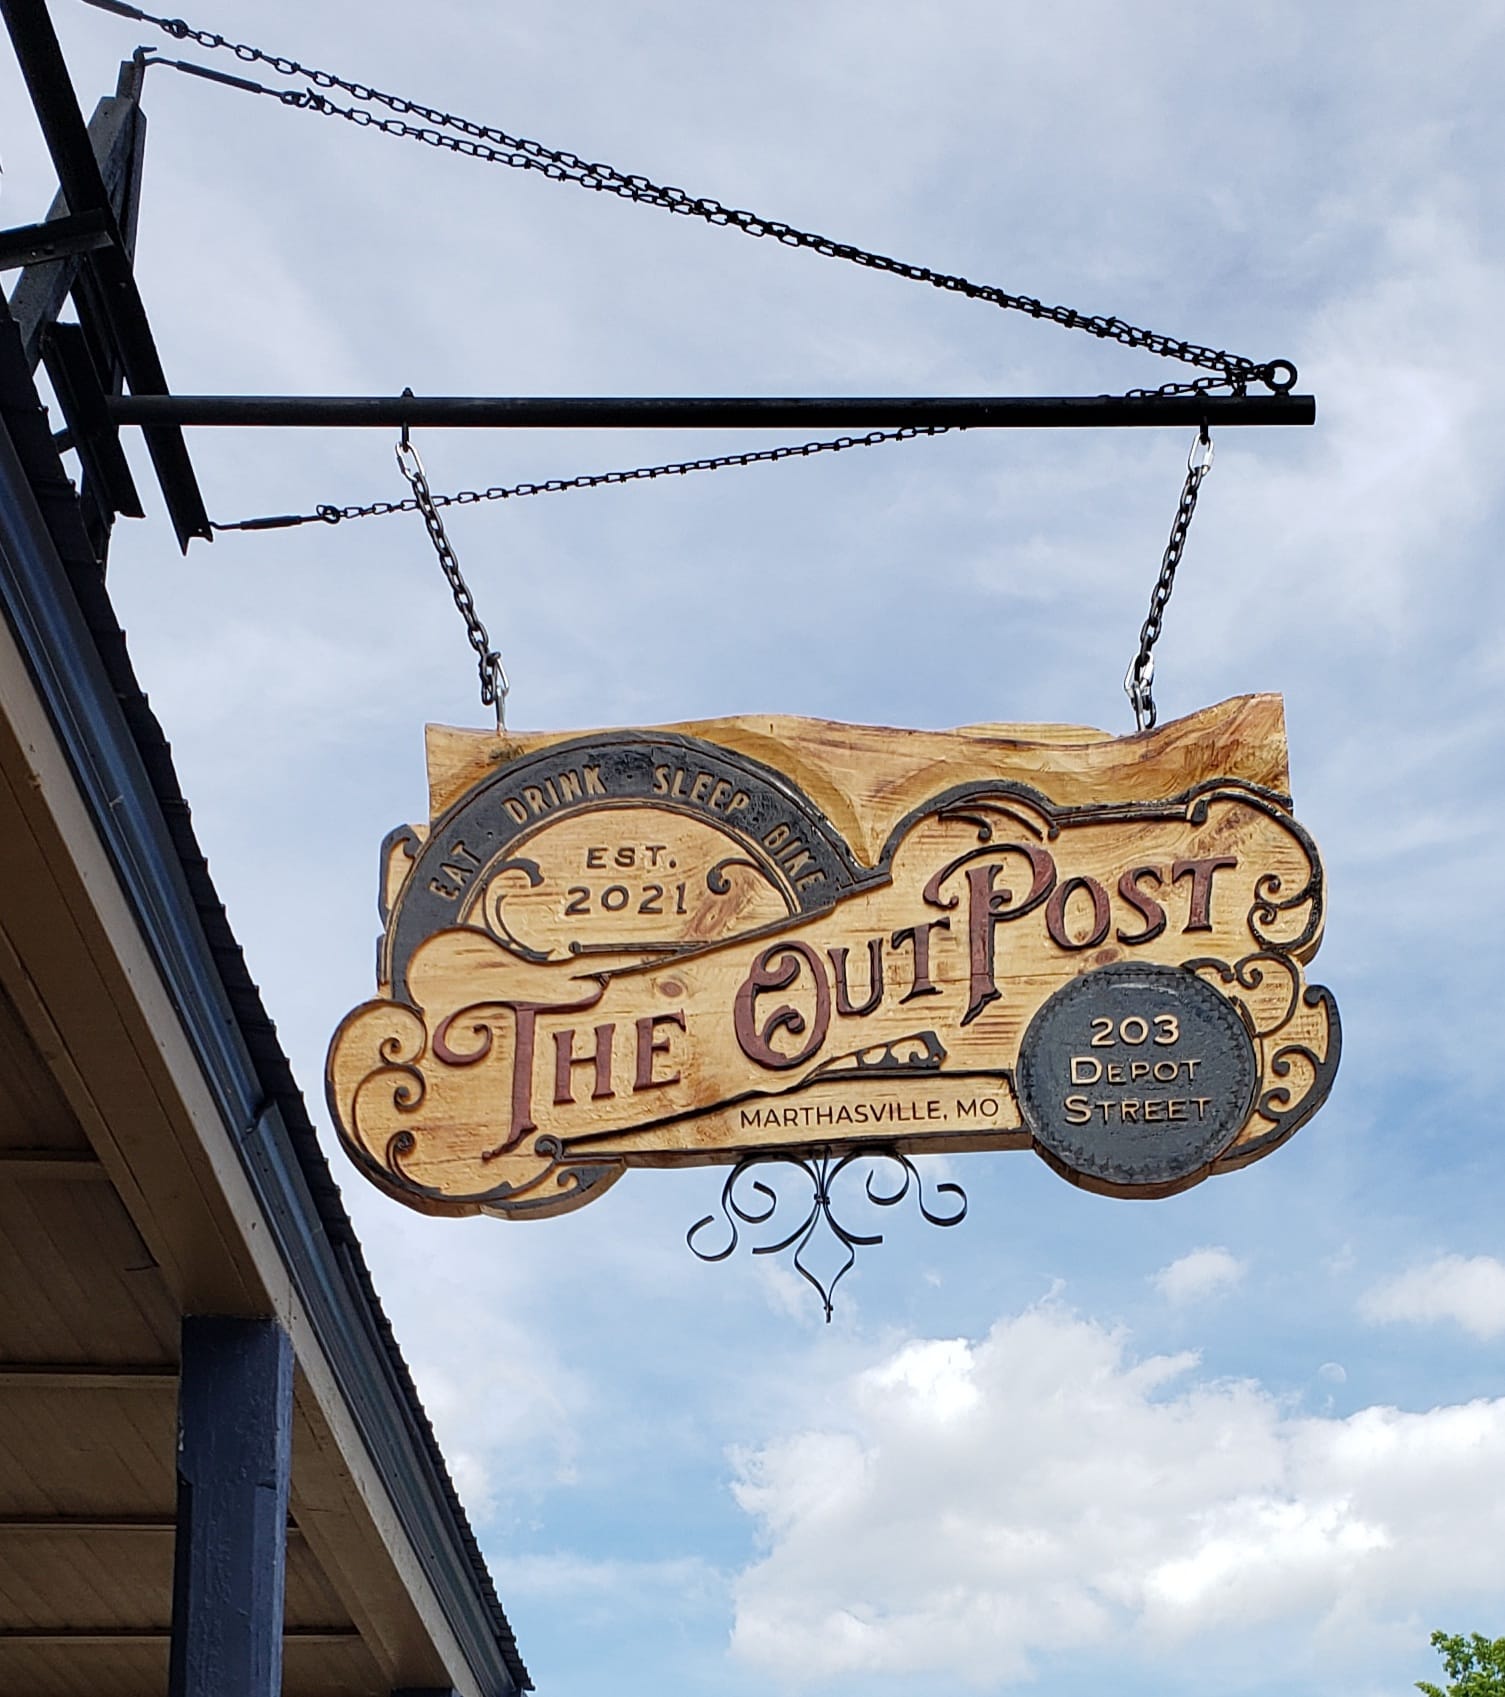 The OutPost in The Historic Marthasville Hardware Building